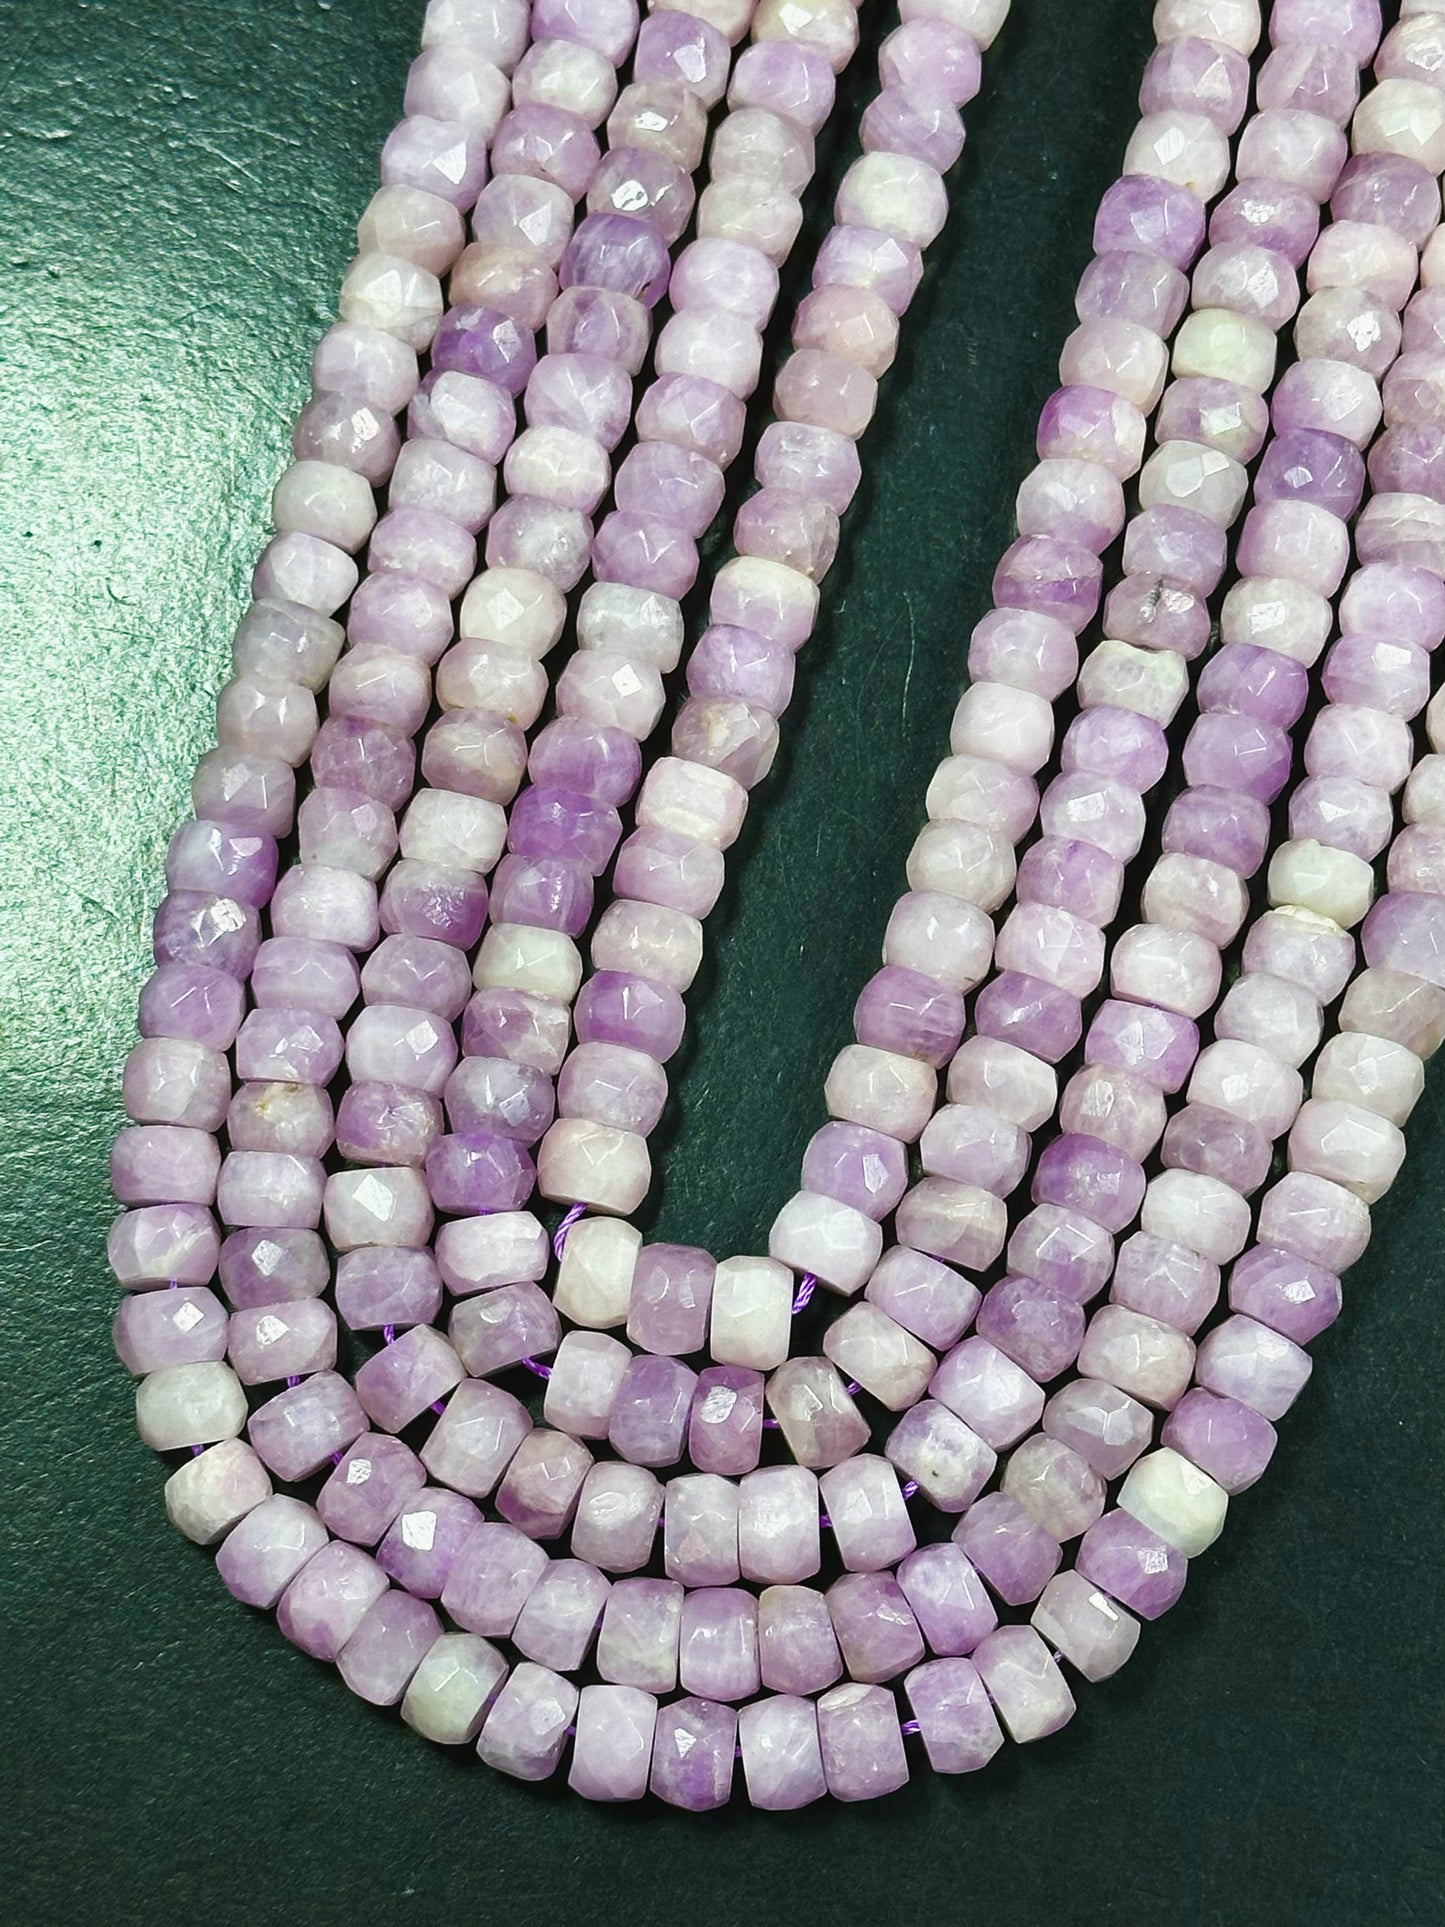 AAA Natural Kunzite Gemstone Bead Faceted 9x6mm Rondelle Shape, Gorgeous Natural Pink Purple Color Kunzite, Excellent Quality 15.5" Strand